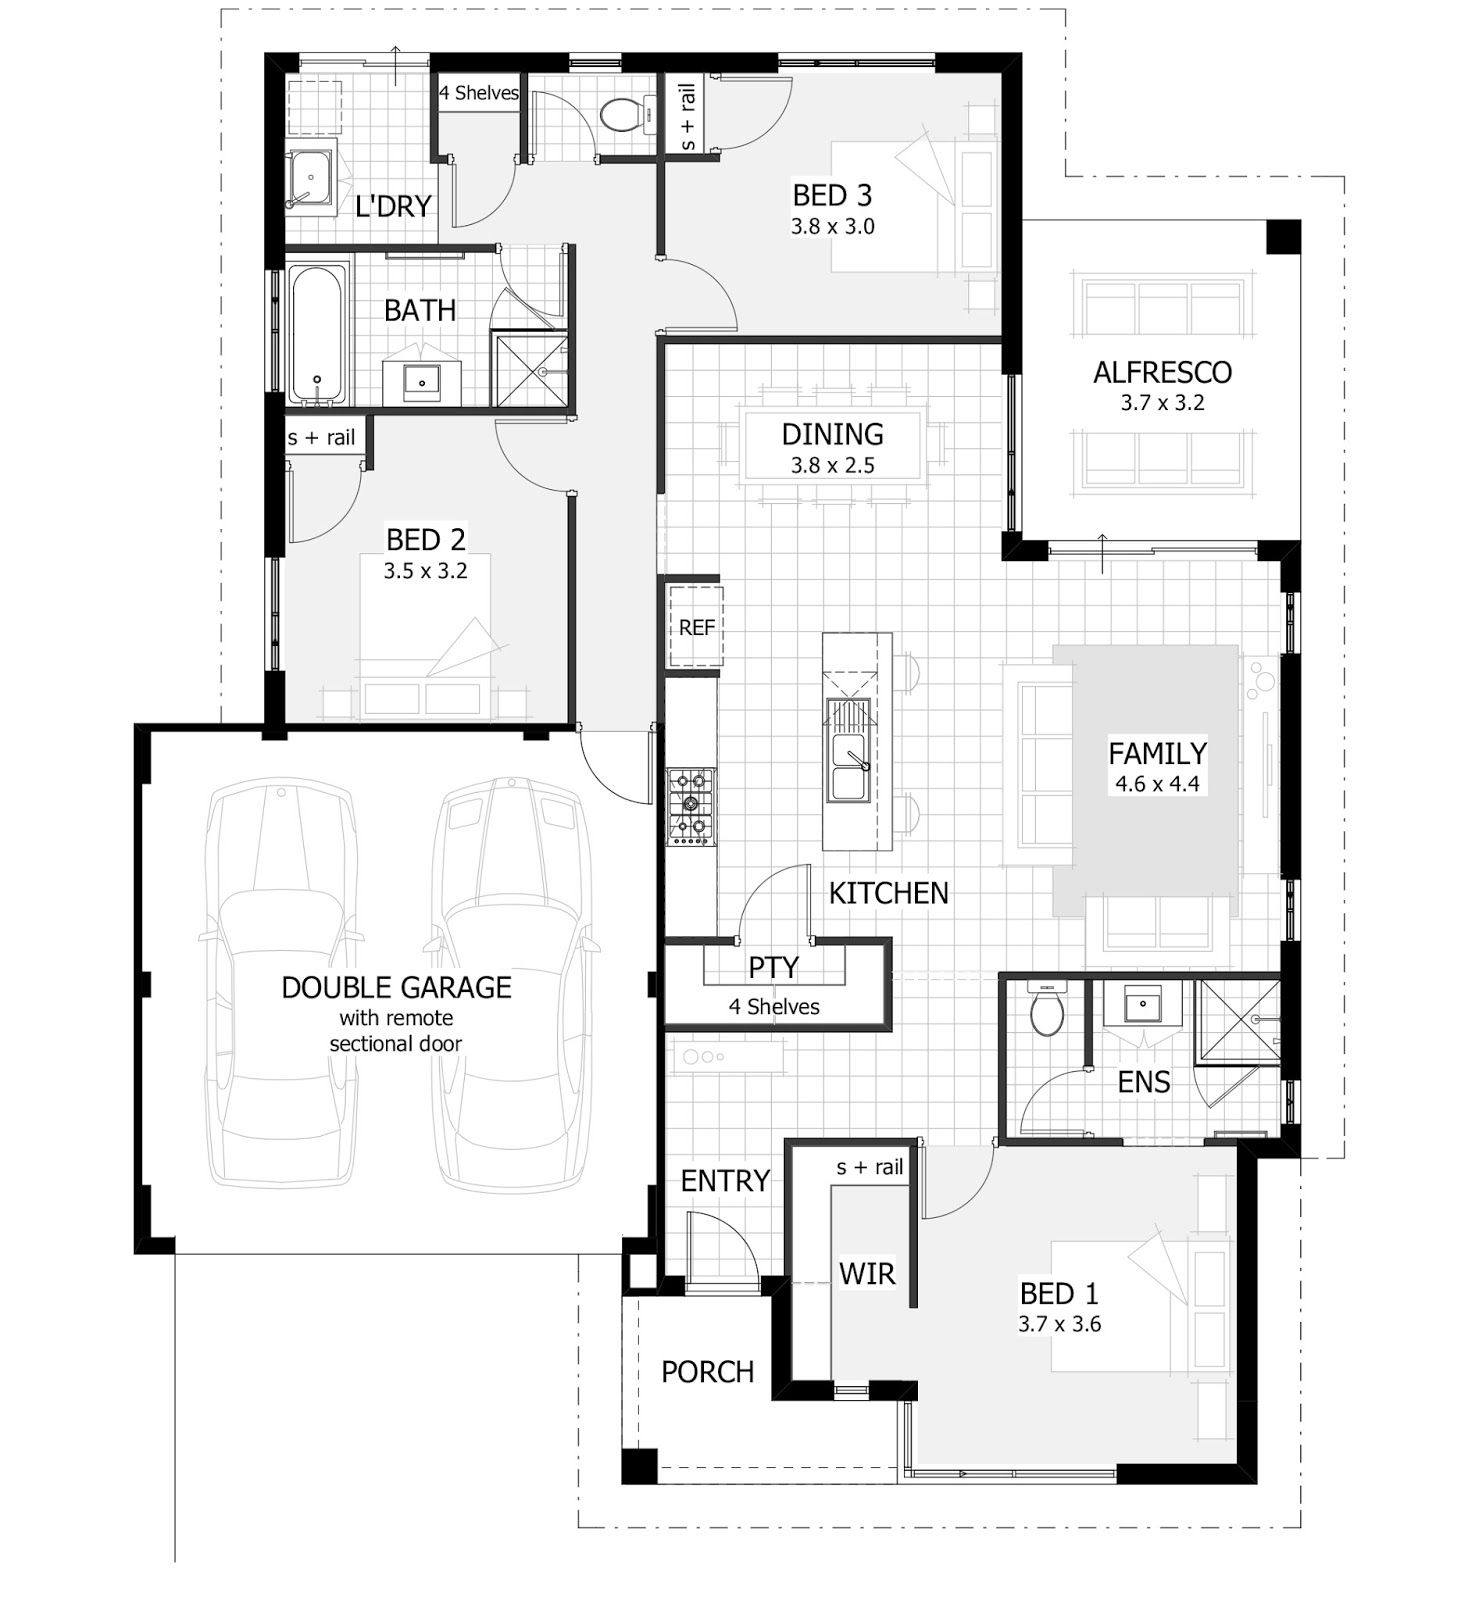 One story 3 Bedrooms and 2 Baths ground floor plan in 2020